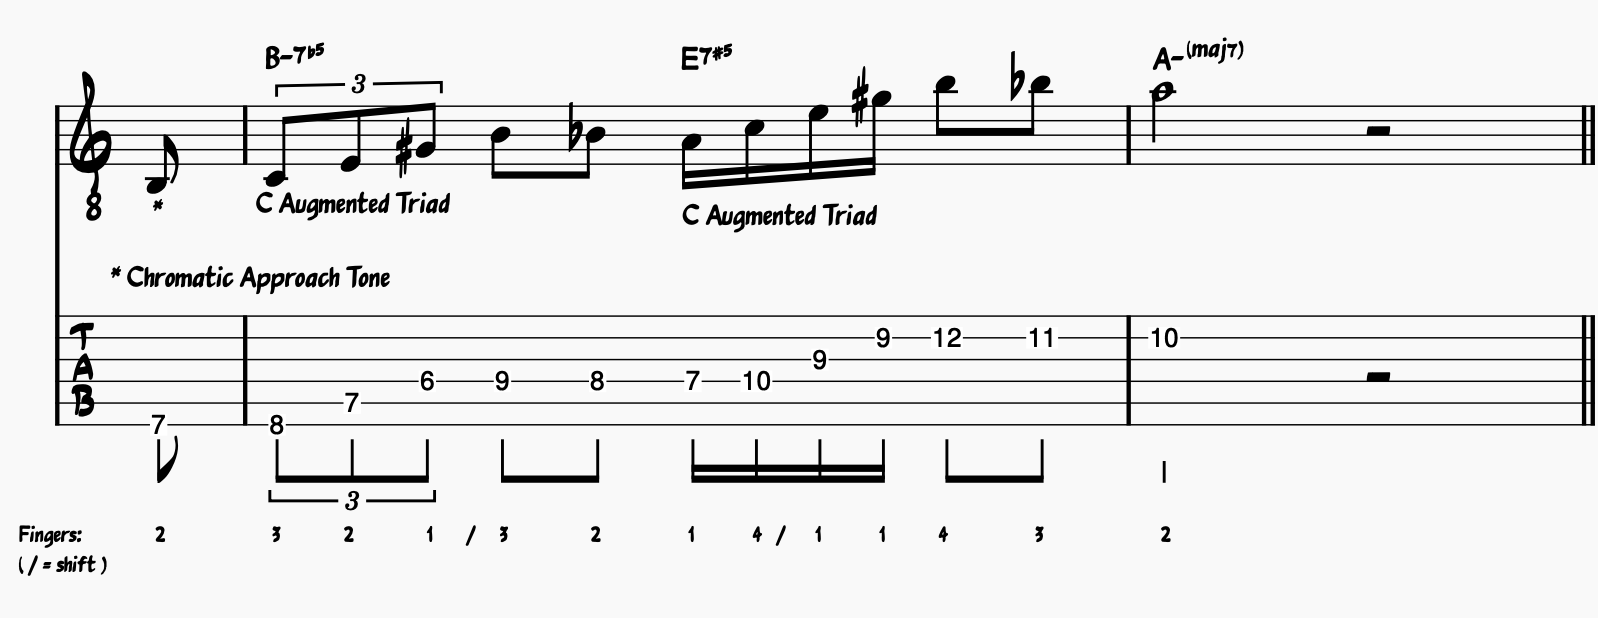 Lick 8: Augmented Triad Sweeps variation